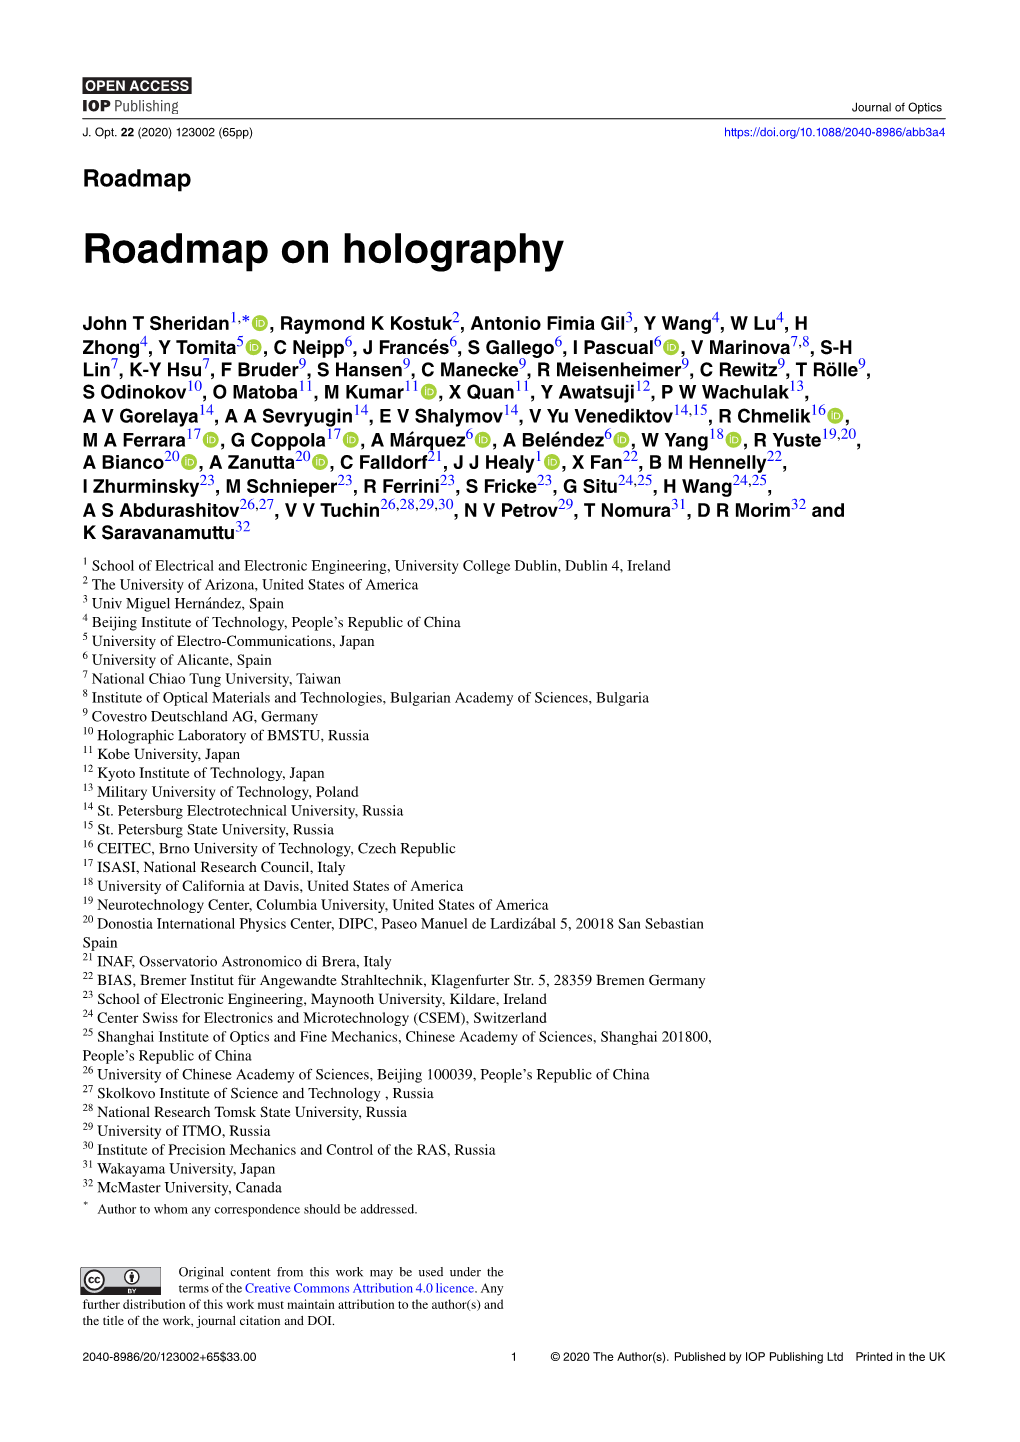 Roadmap on Holography